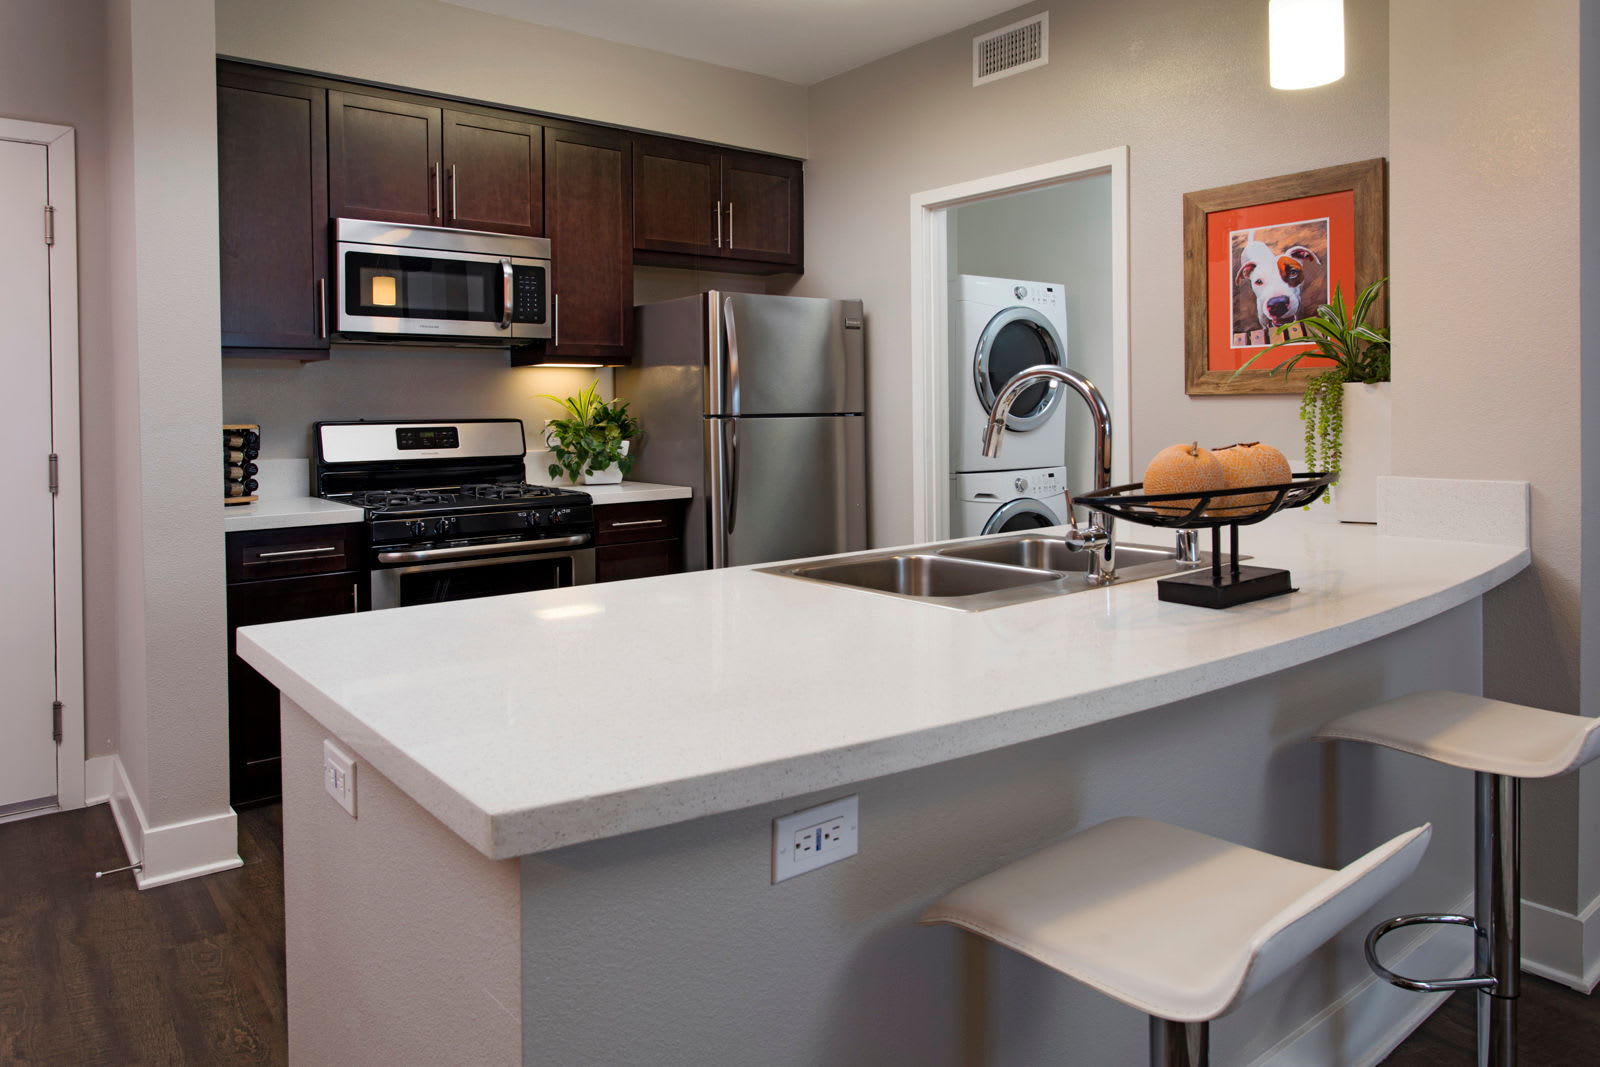 Model kitchen with updated appliances at The Boulevard Apartment Homes in Woodland Hills, California